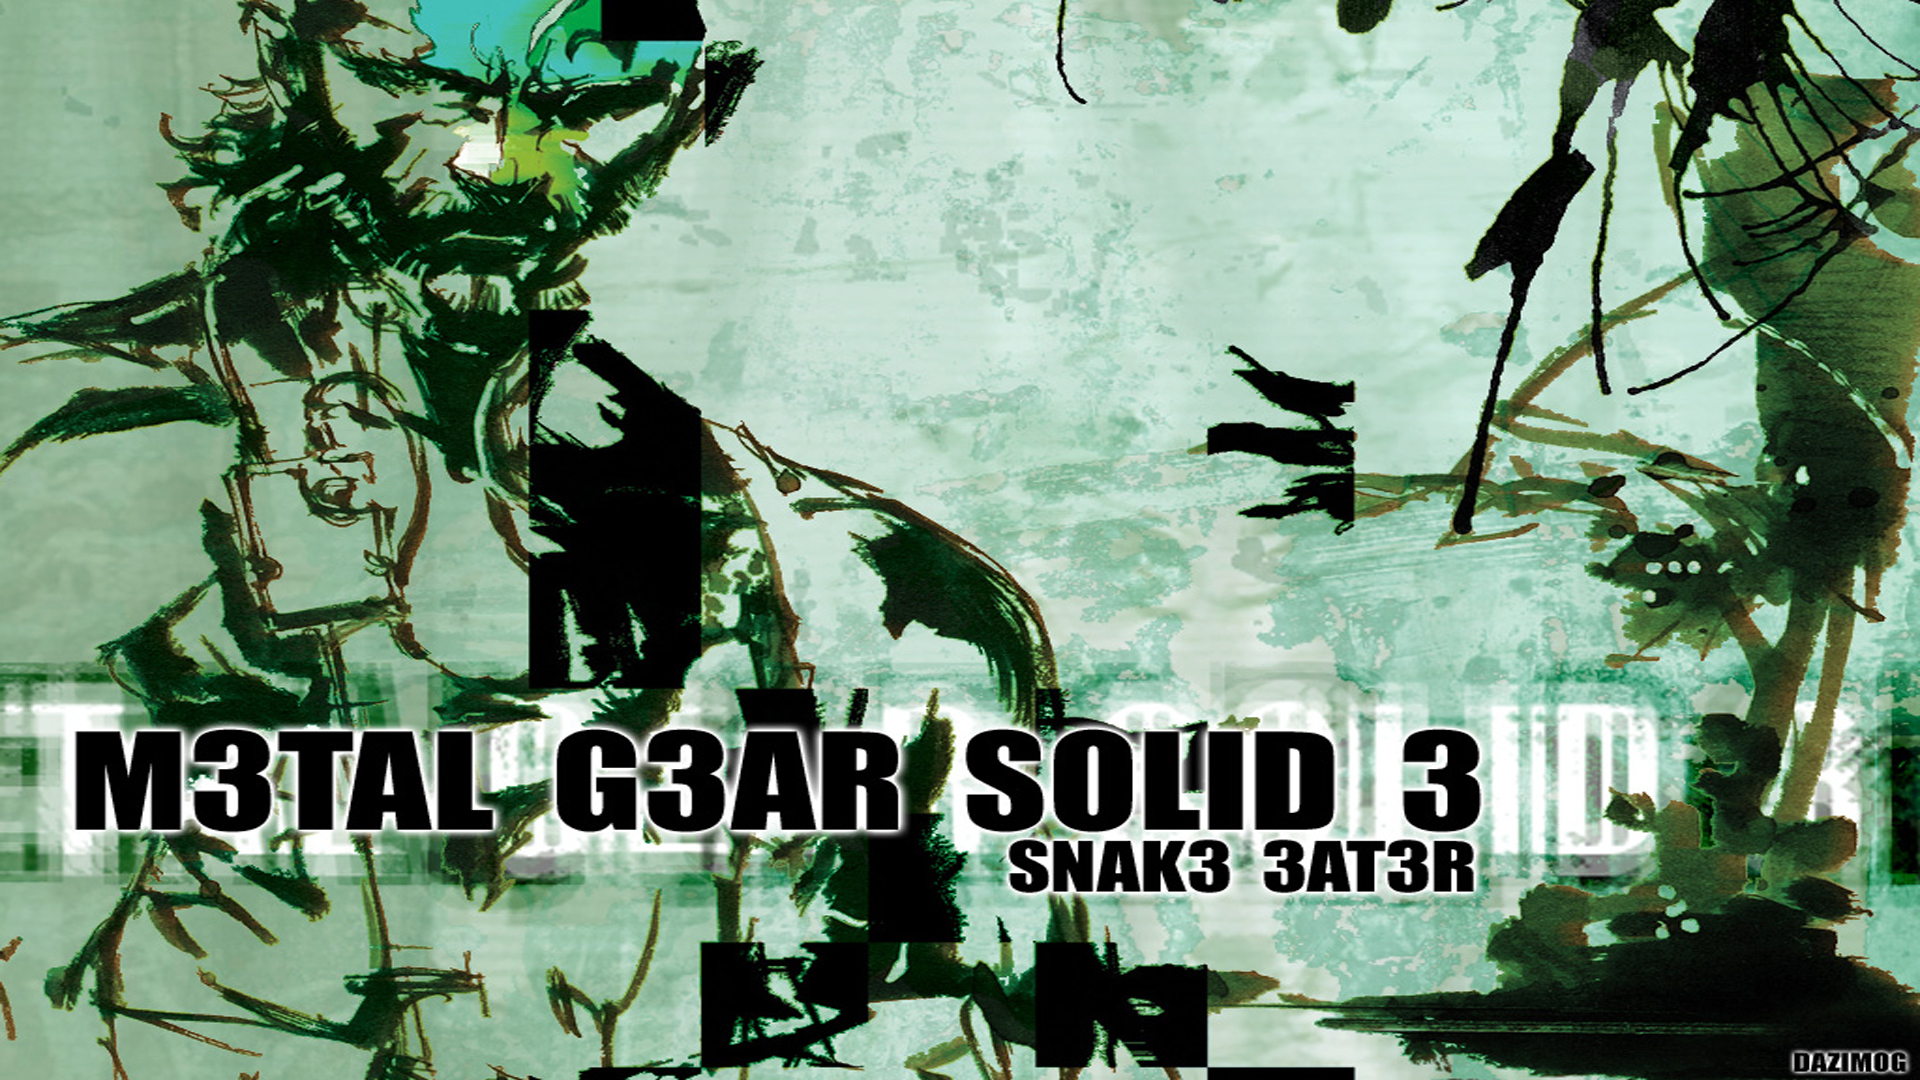 Video Game Metal Gear Solid 3 Snake Eater 1920x1080